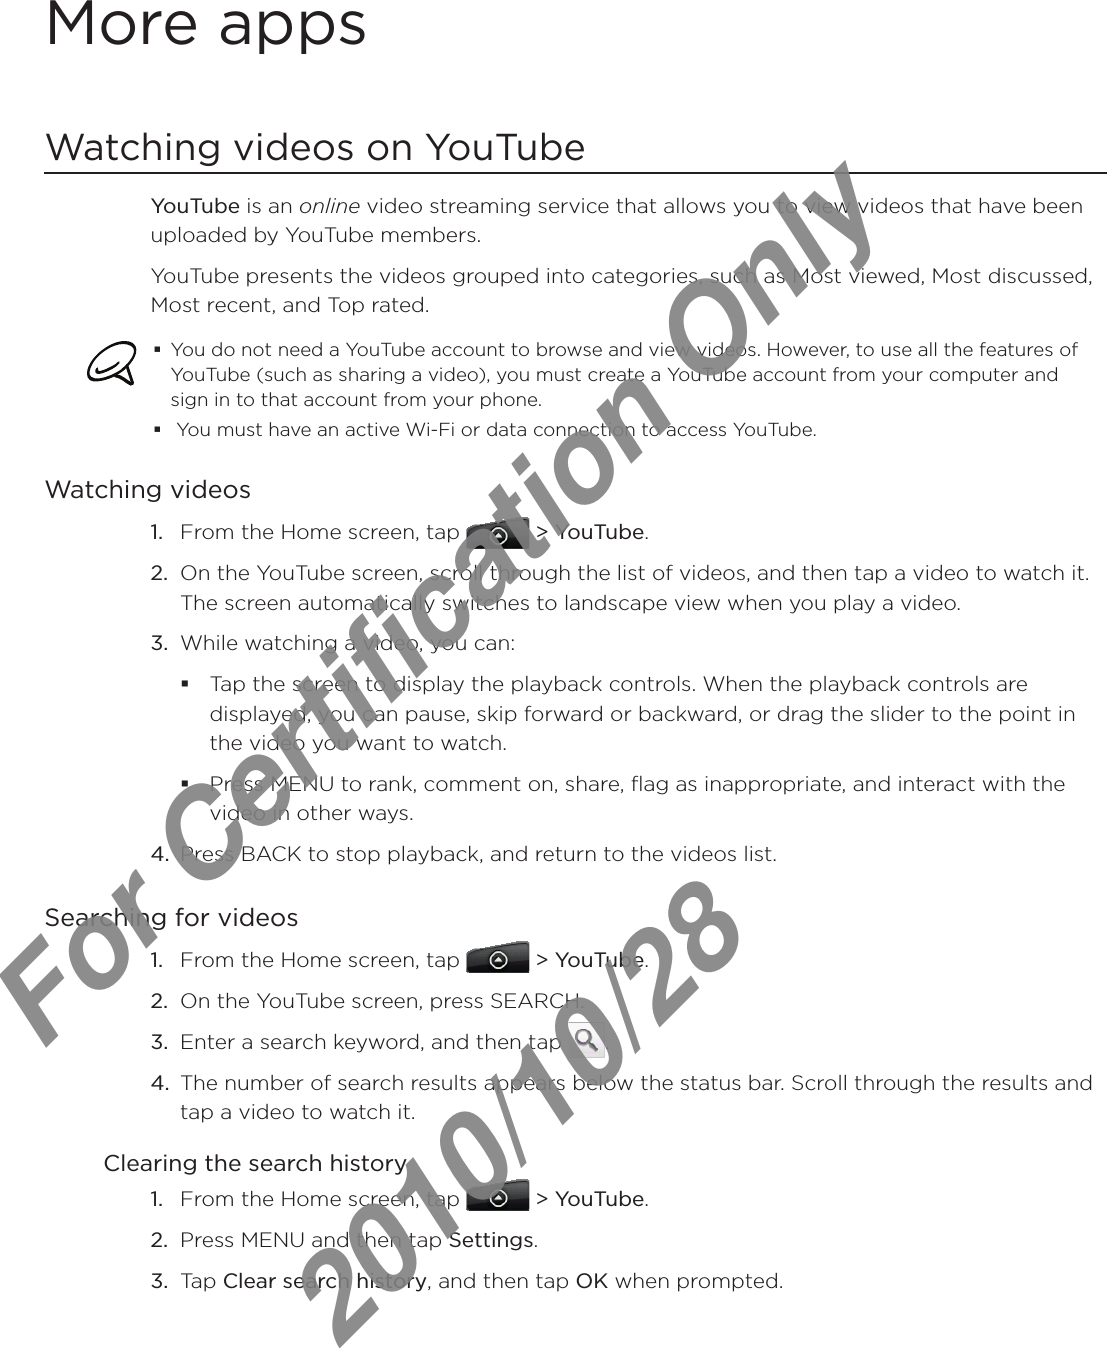 More appsWatching videos on YouTubeYouTube is an online video streaming service that allows you to view videos that have been uploaded by YouTube members.YouTube presents the videos grouped into categories, such as Most viewed, Most discussed, Most recent, and Top rated.You do not need a YouTube account to browse and view videos. However, to use all the features of YouTube (such as sharing a video), you must create a YouTube account from your computer and sign in to that account from your phone. You must have an active Wi-Fi or data connection to access YouTube.Watching videosFrom the Home screen, tap   &gt; YouTube.On the YouTube screen, scroll through the list of videos, and then tap a video to watch it. The screen automatically switches to landscape view when you play a video.While watching a video, you can: Tap the screen to display the playback controls. When the playback controls are displayed, you can pause, skip forward or backward, or drag the slider to the point in the video you want to watch.Press MENU to rank, comment on, share, flag as inappropriate, and interact with the video in other ways.4.  Press BACK to stop playback, and return to the videos list.Searching for videosFrom the Home screen, tap   &gt; YouTube. On the YouTube screen, press SEARCH.Enter a search keyword, and then tap  .The number of search results appears below the status bar. Scroll through the results and tap a video to watch it.Clearing the search historyFrom the Home screen, tap   &gt; YouTube.Press MENU and then tap Settings.Tap Clear search history, and then tap OK when prompted.1.2.3.1.2.3.4.1.2.3.For Certification Only   2010/10/28